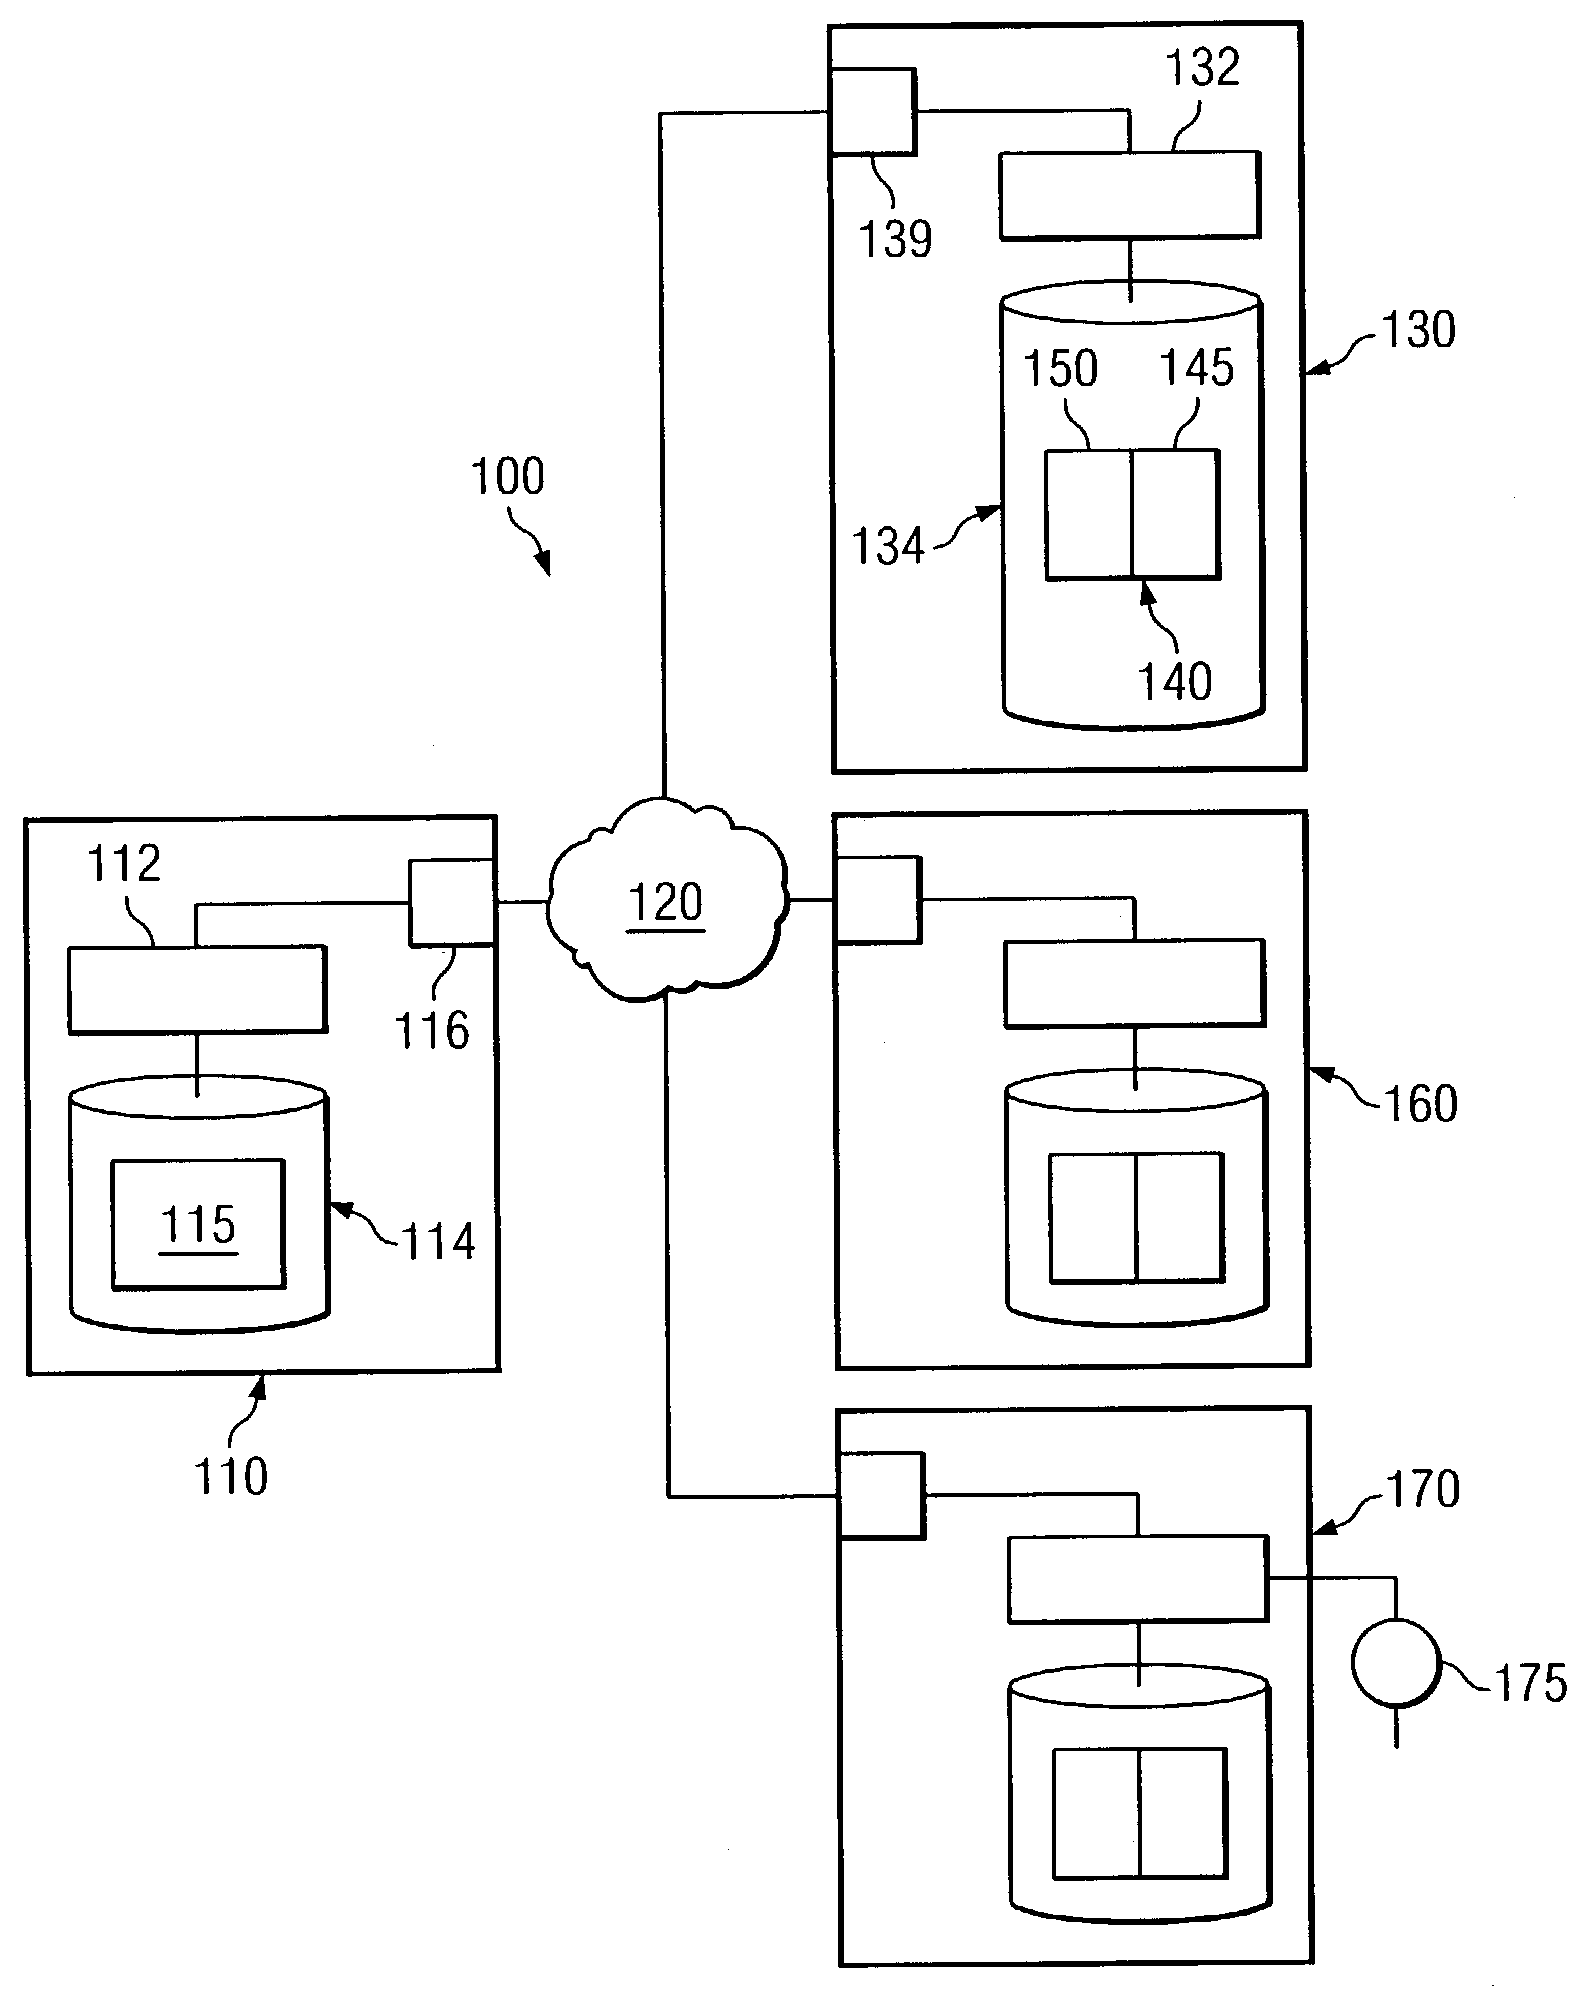 System and method for dynamically determining notification behavior of a monitoring system in a network environment